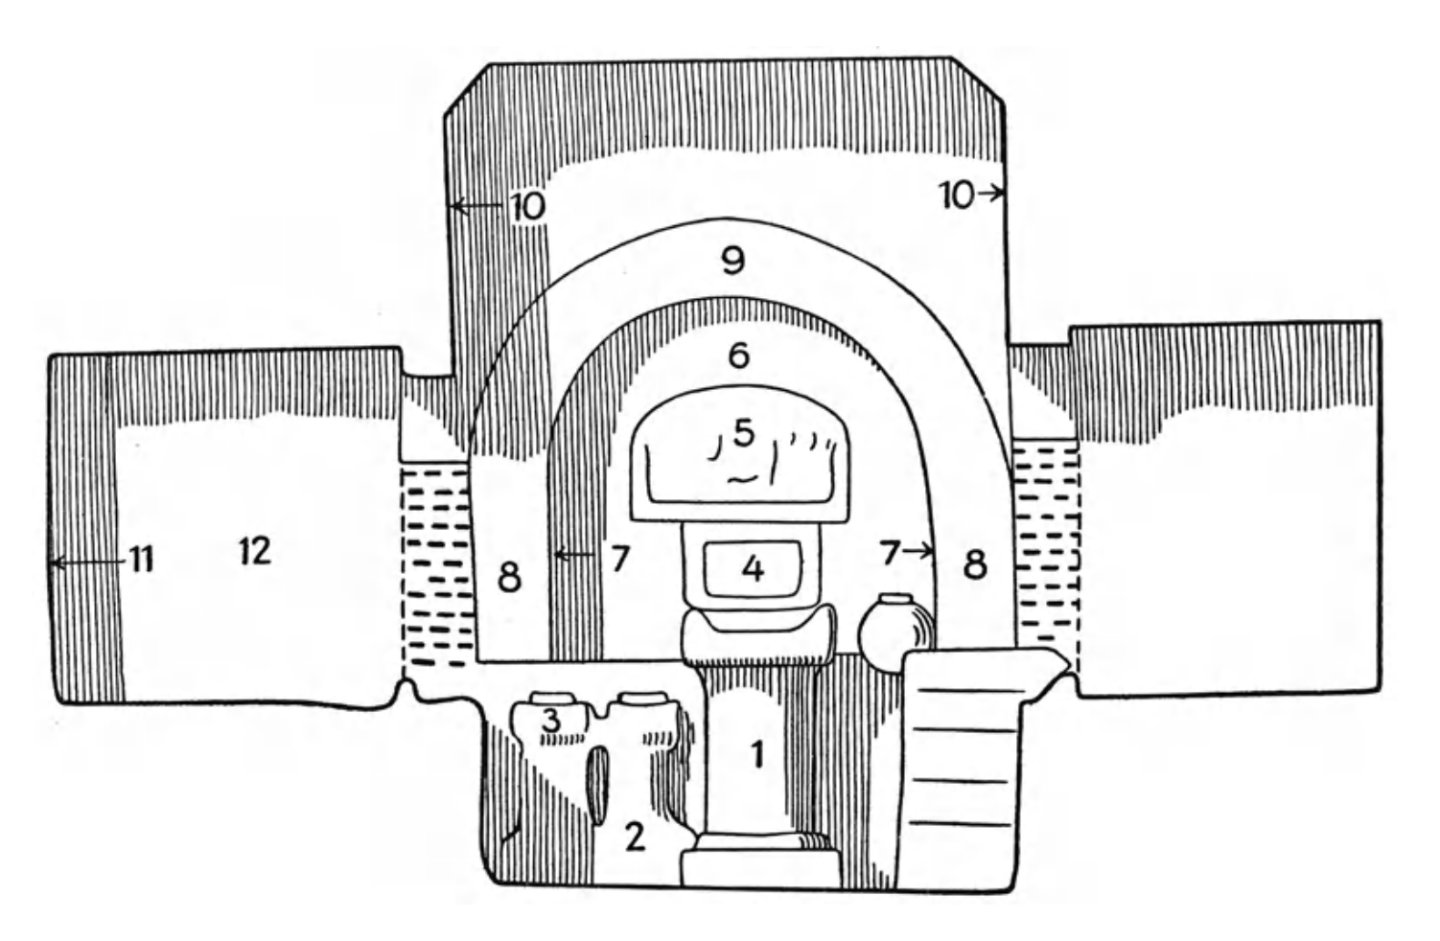 Layout of the main altar of Dura Europos